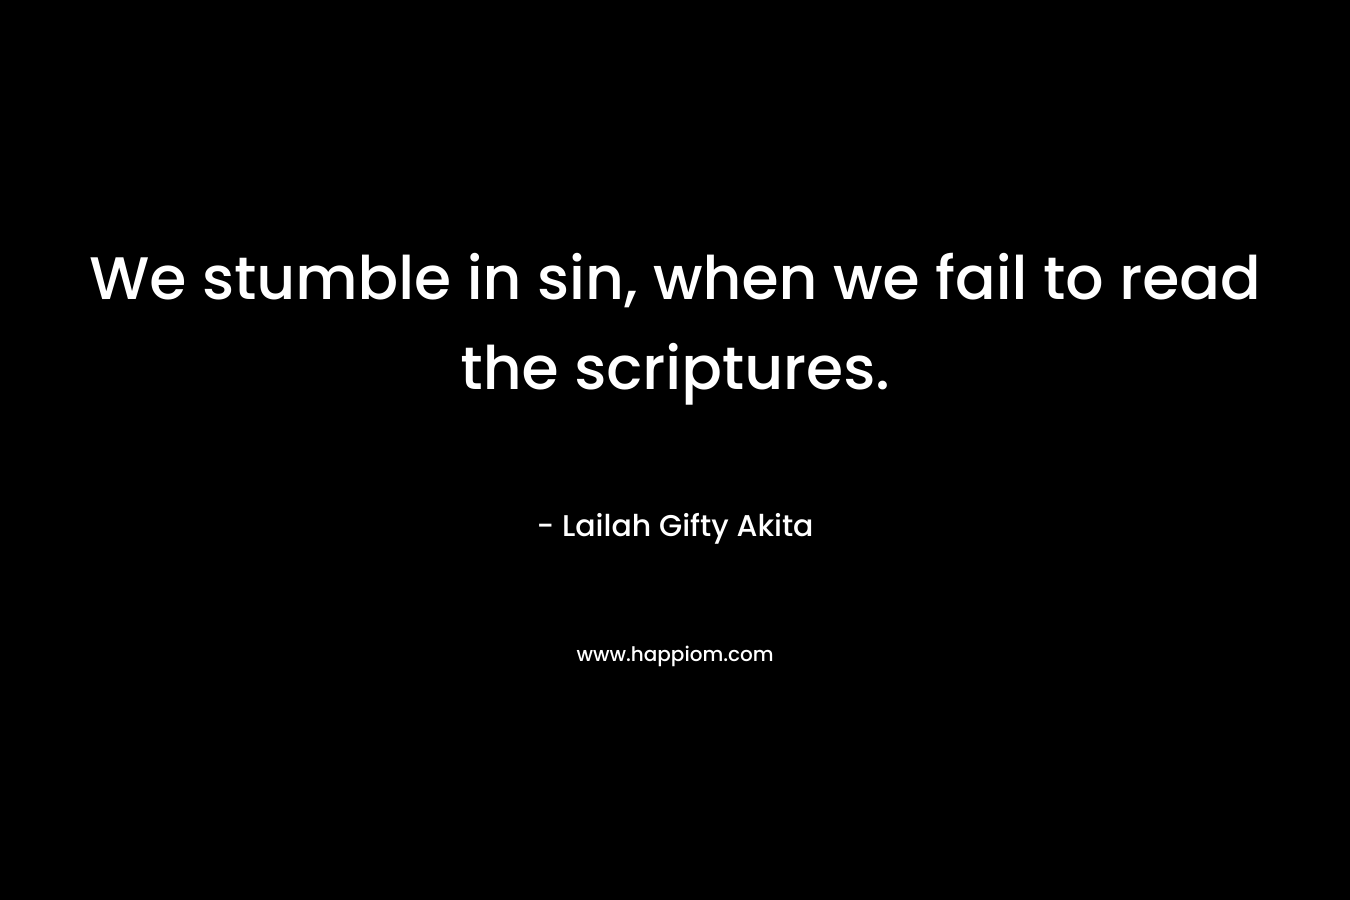 We stumble in sin, when we fail to read the scriptures.